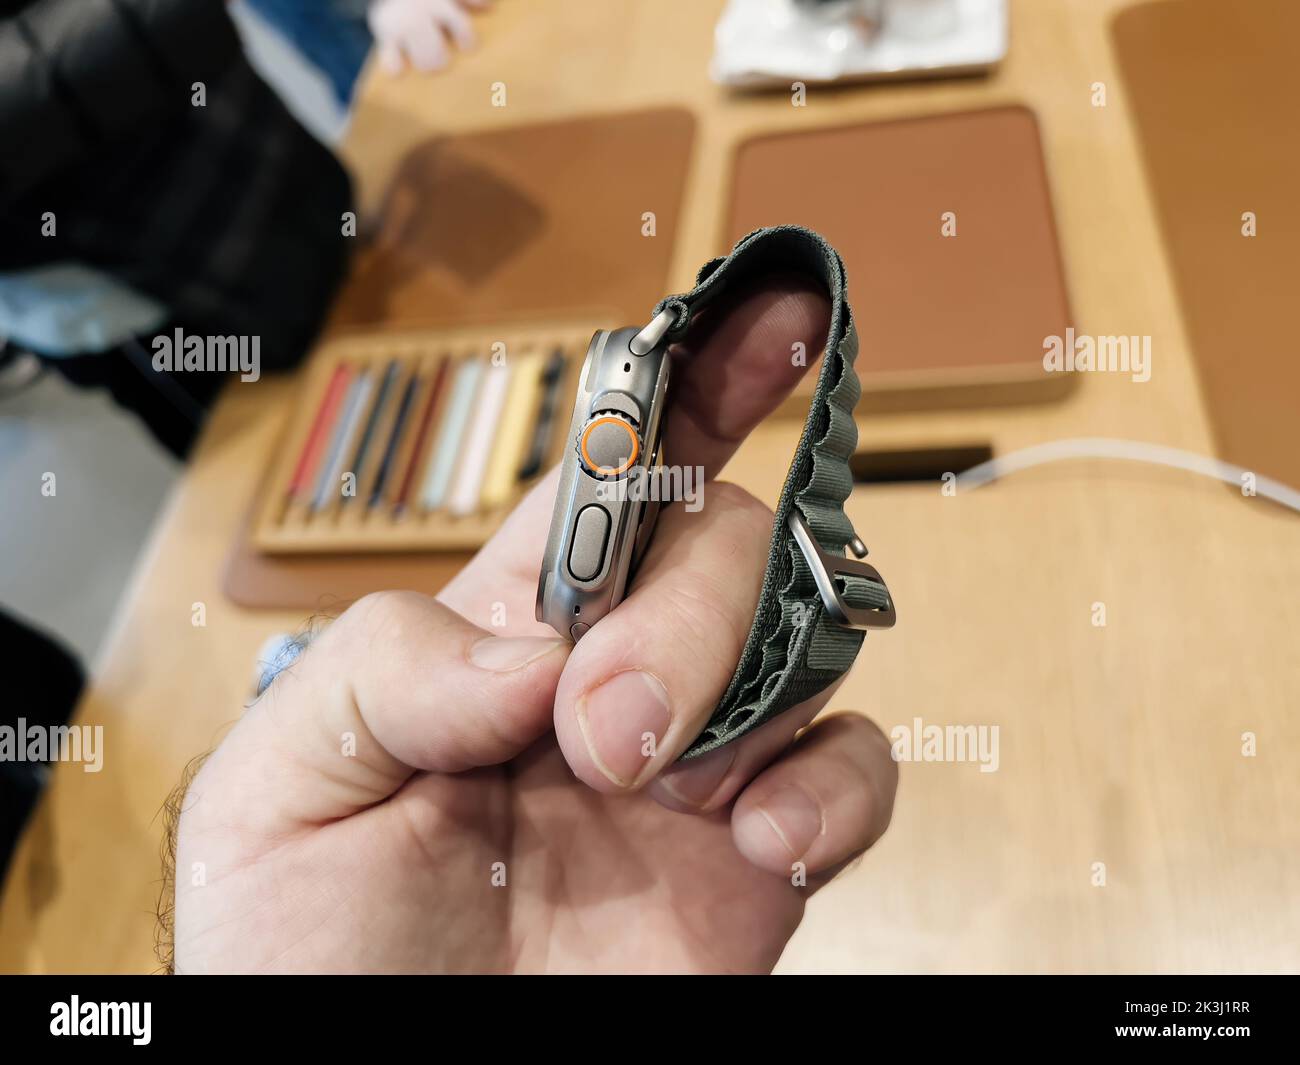 Paris, France - Sep 23, 2022: Man looking at the side of Apple Store first day of sale for new titanium Apple Watch Ultra designed for extreme activities like endurance sports, elite athletes, trailblazing, adventure Stock Photo